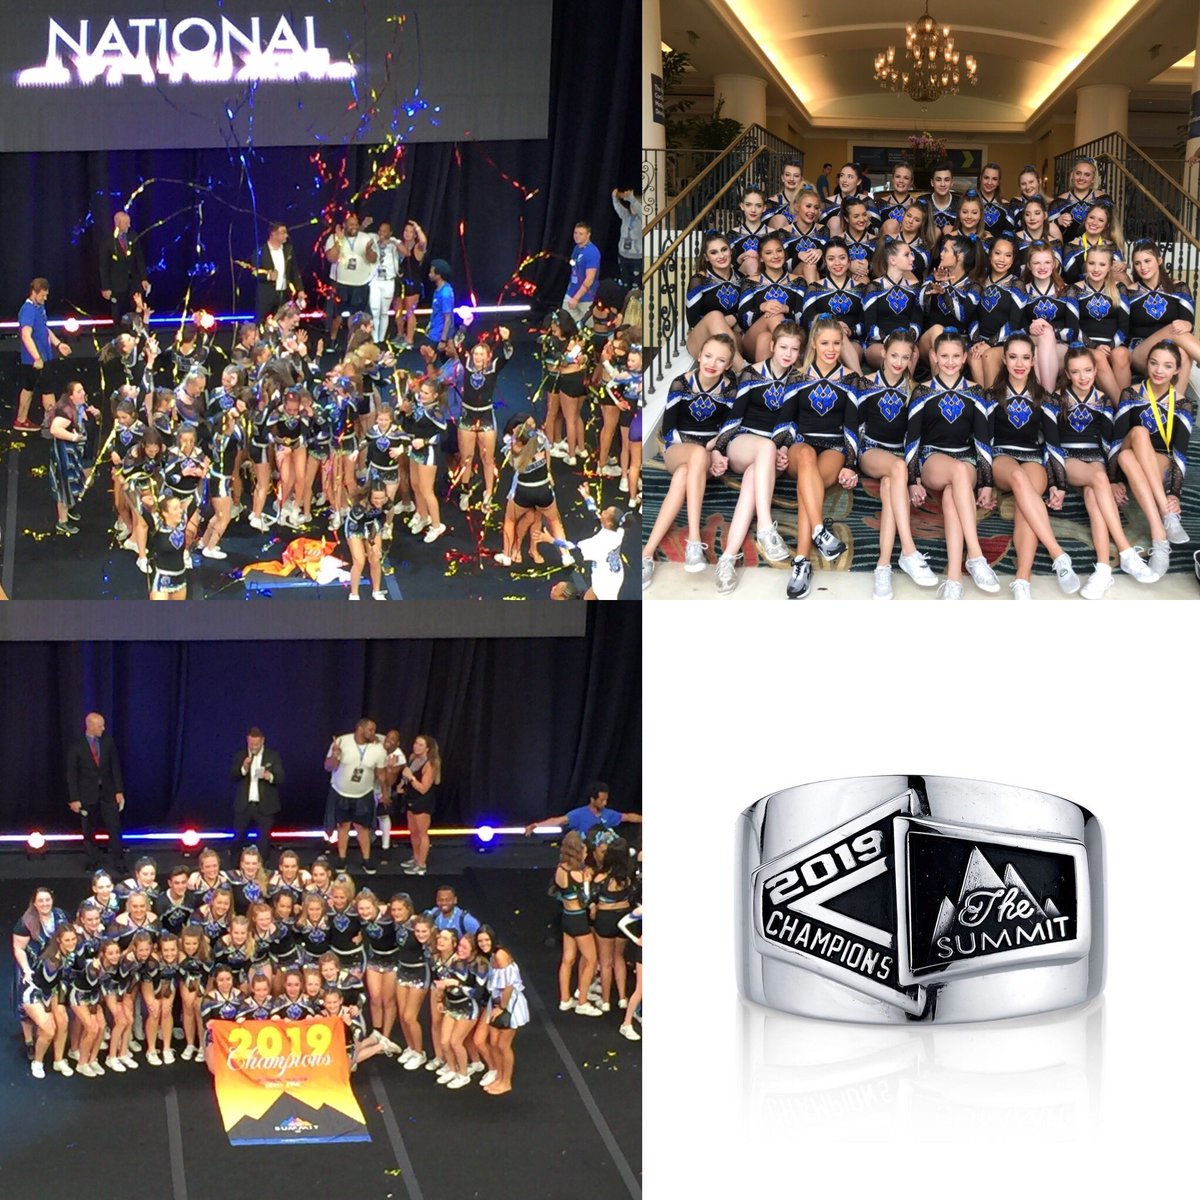 Tomorrow is Our Ring Ceremony 💍💍💍💍💍#summitchamps #gcgs #wwd #sabres4life 💙💙💙💙